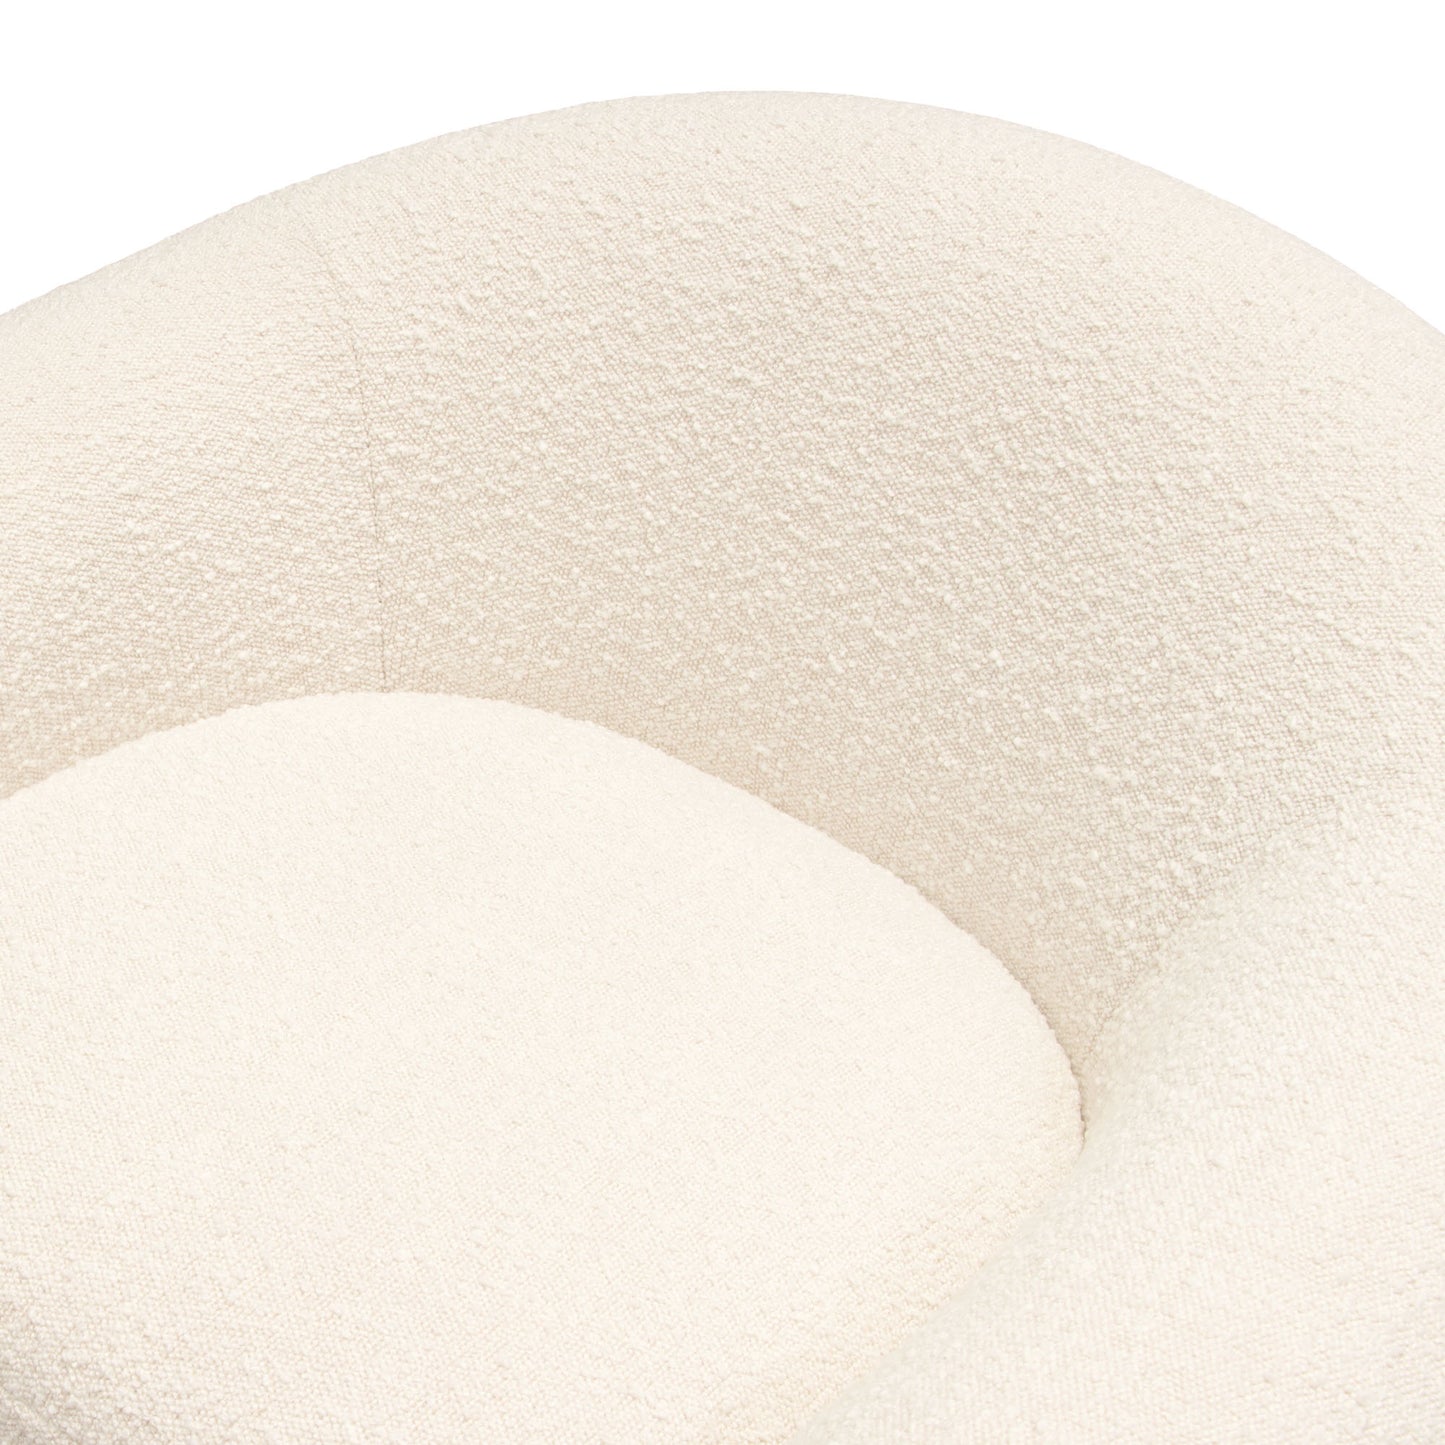 Pascal Swivel Chair in Bone Boucle Textured Fabric w/ Contoured Arms & Back